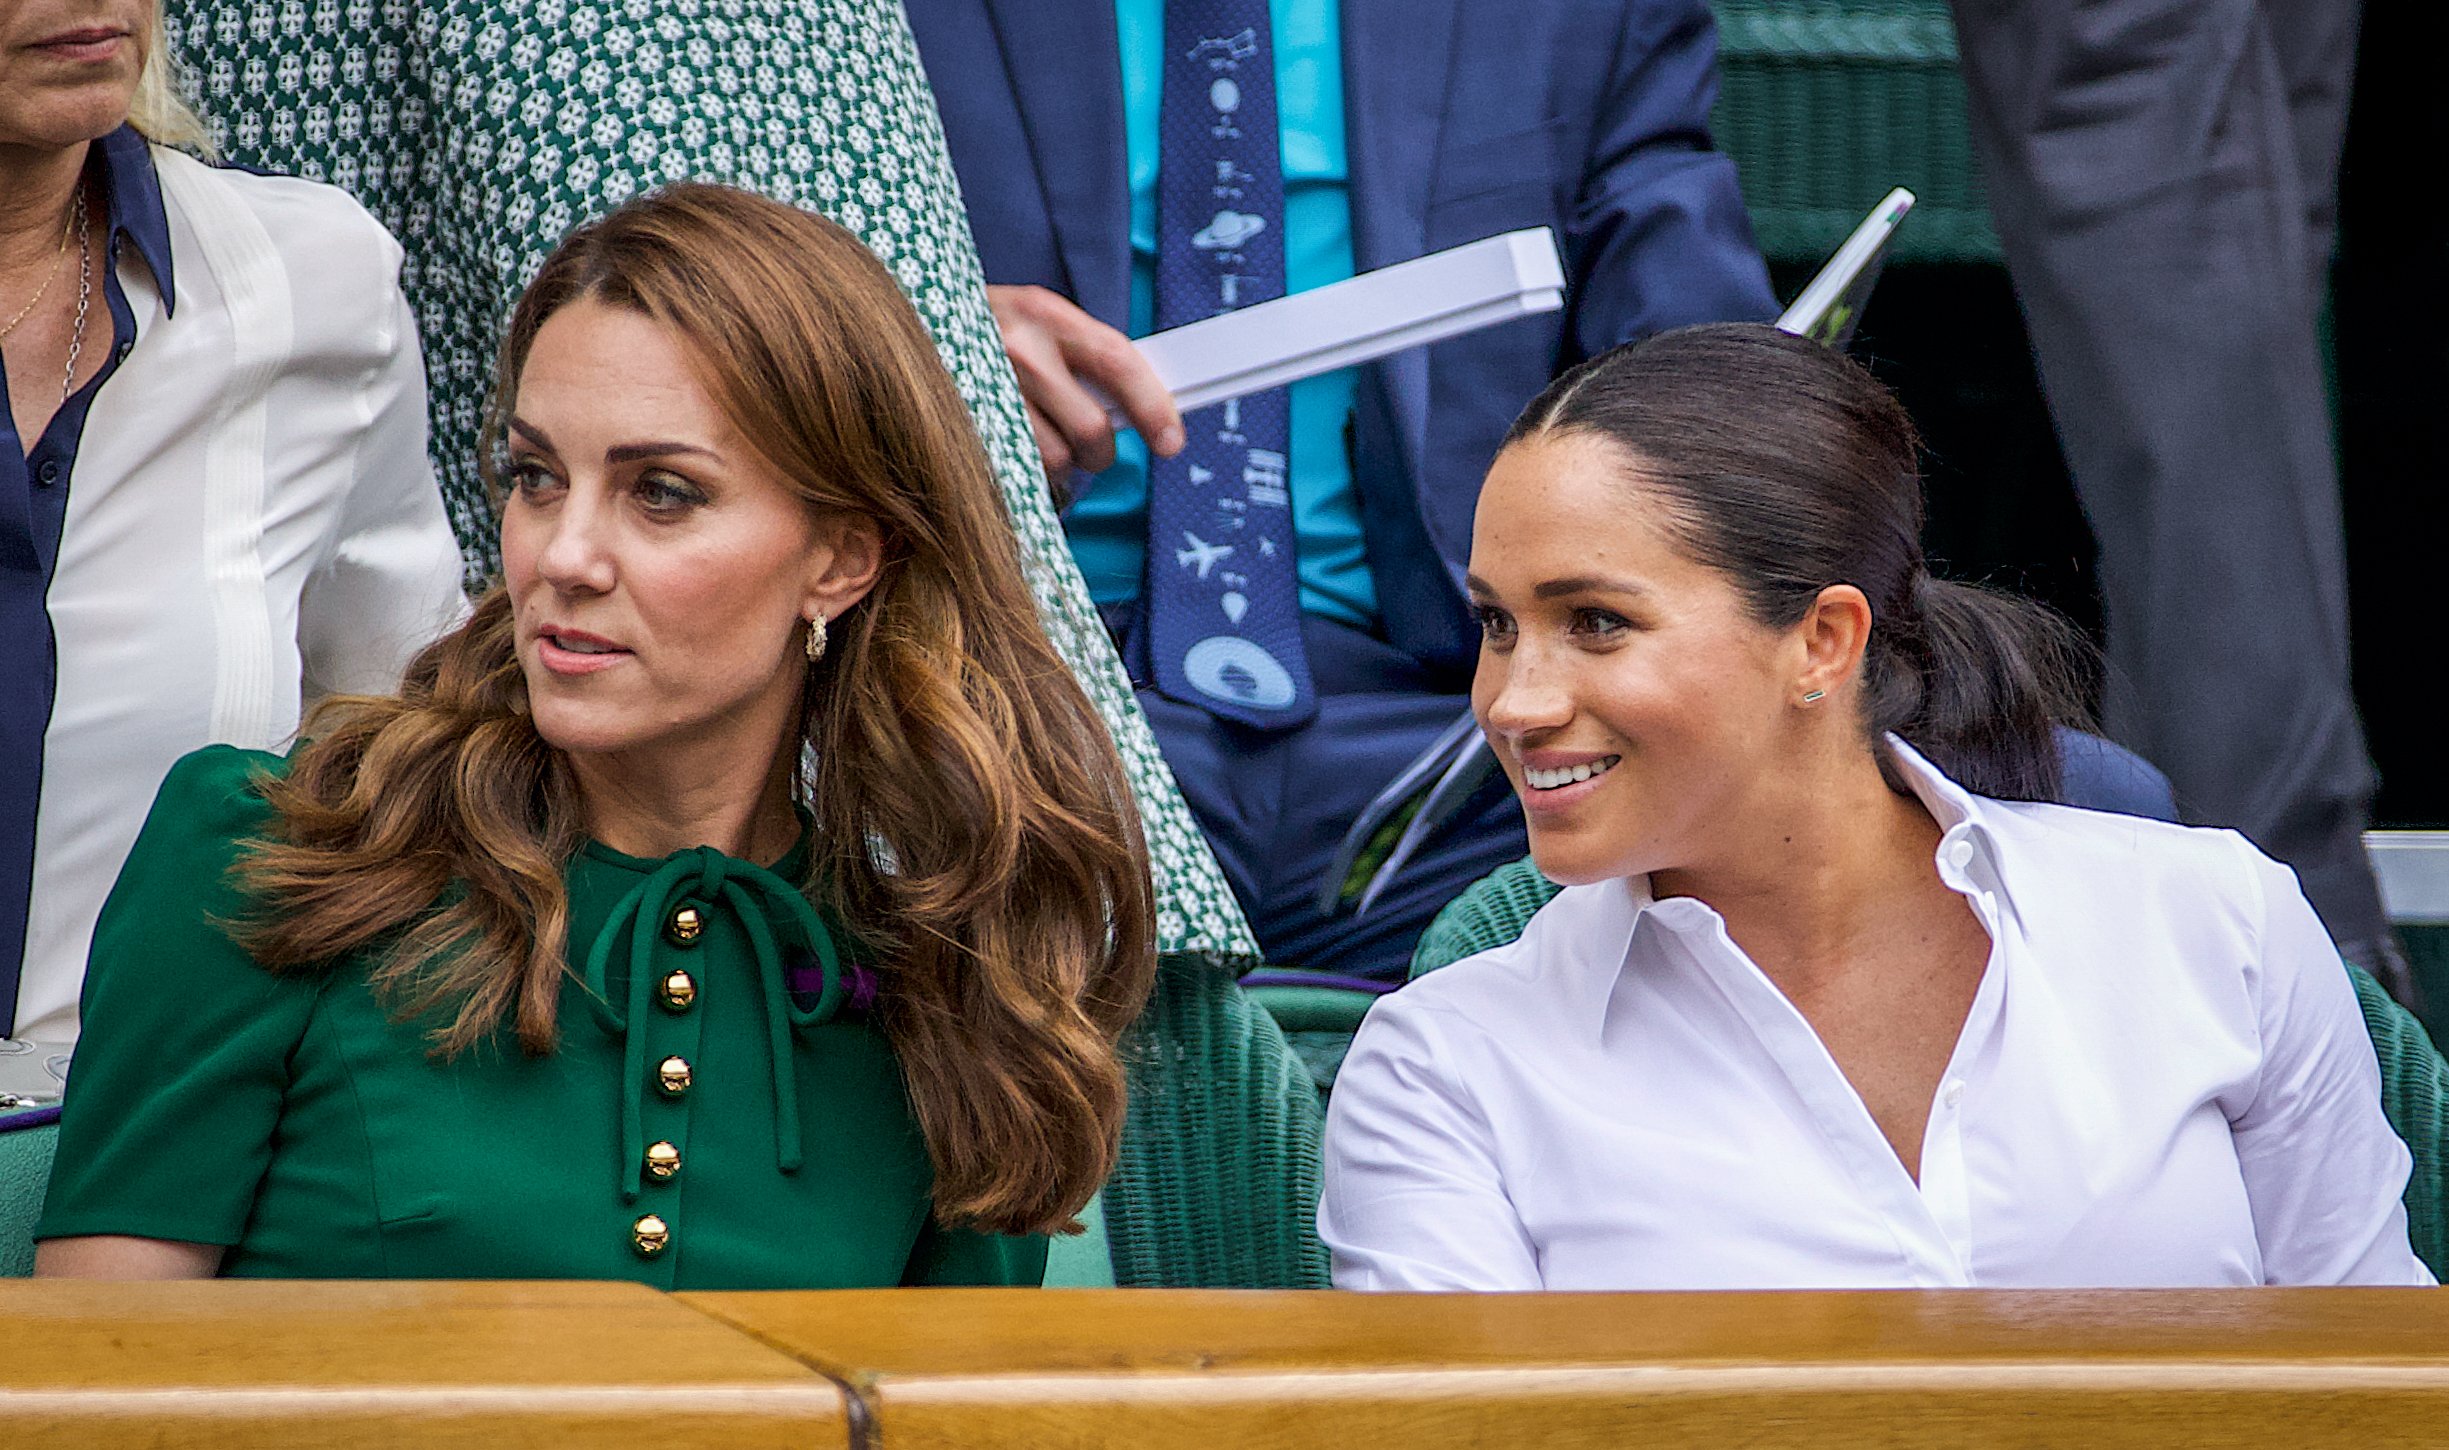 Duchess Kate and Duchess Meghan in the Royal Box on Centre Court ahead of the Ladies Singles Final during the Wimbledon Lawn Tennis Championships on July 13, 2019, in London, England. | Source: Getty Images